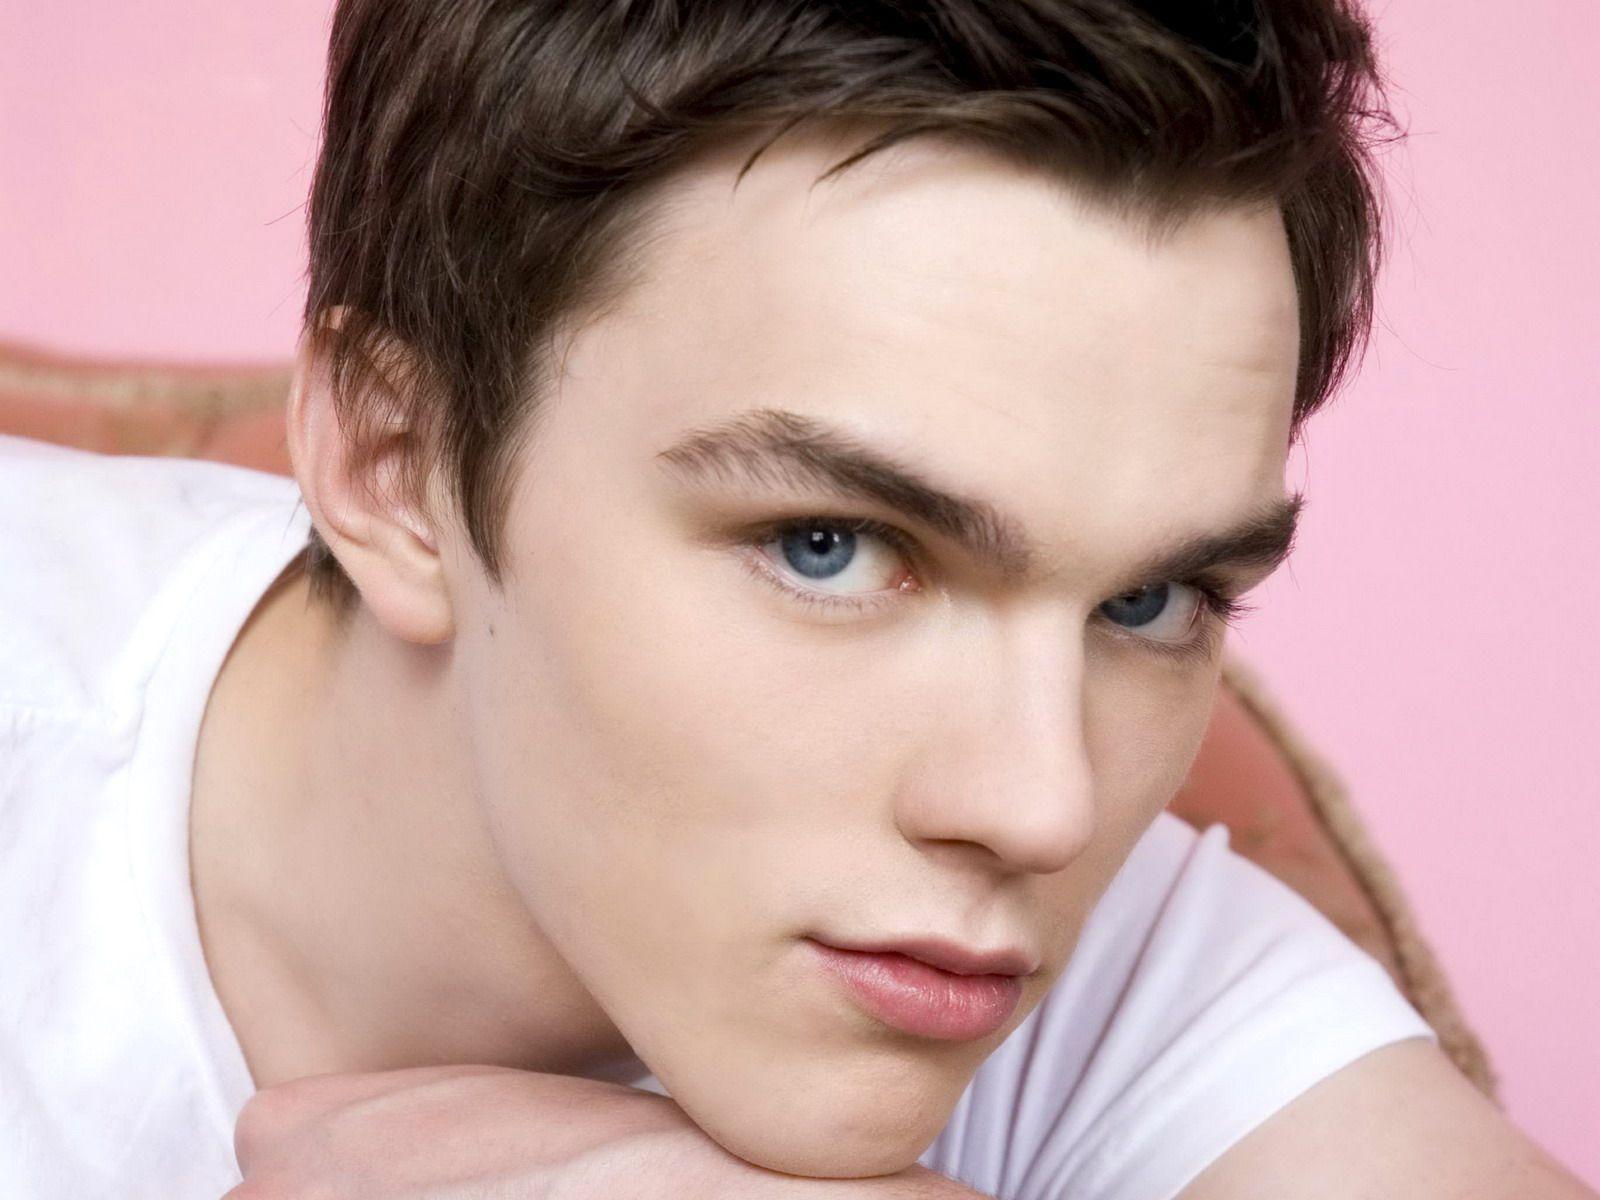 Russell Hoult Wallpaper Image